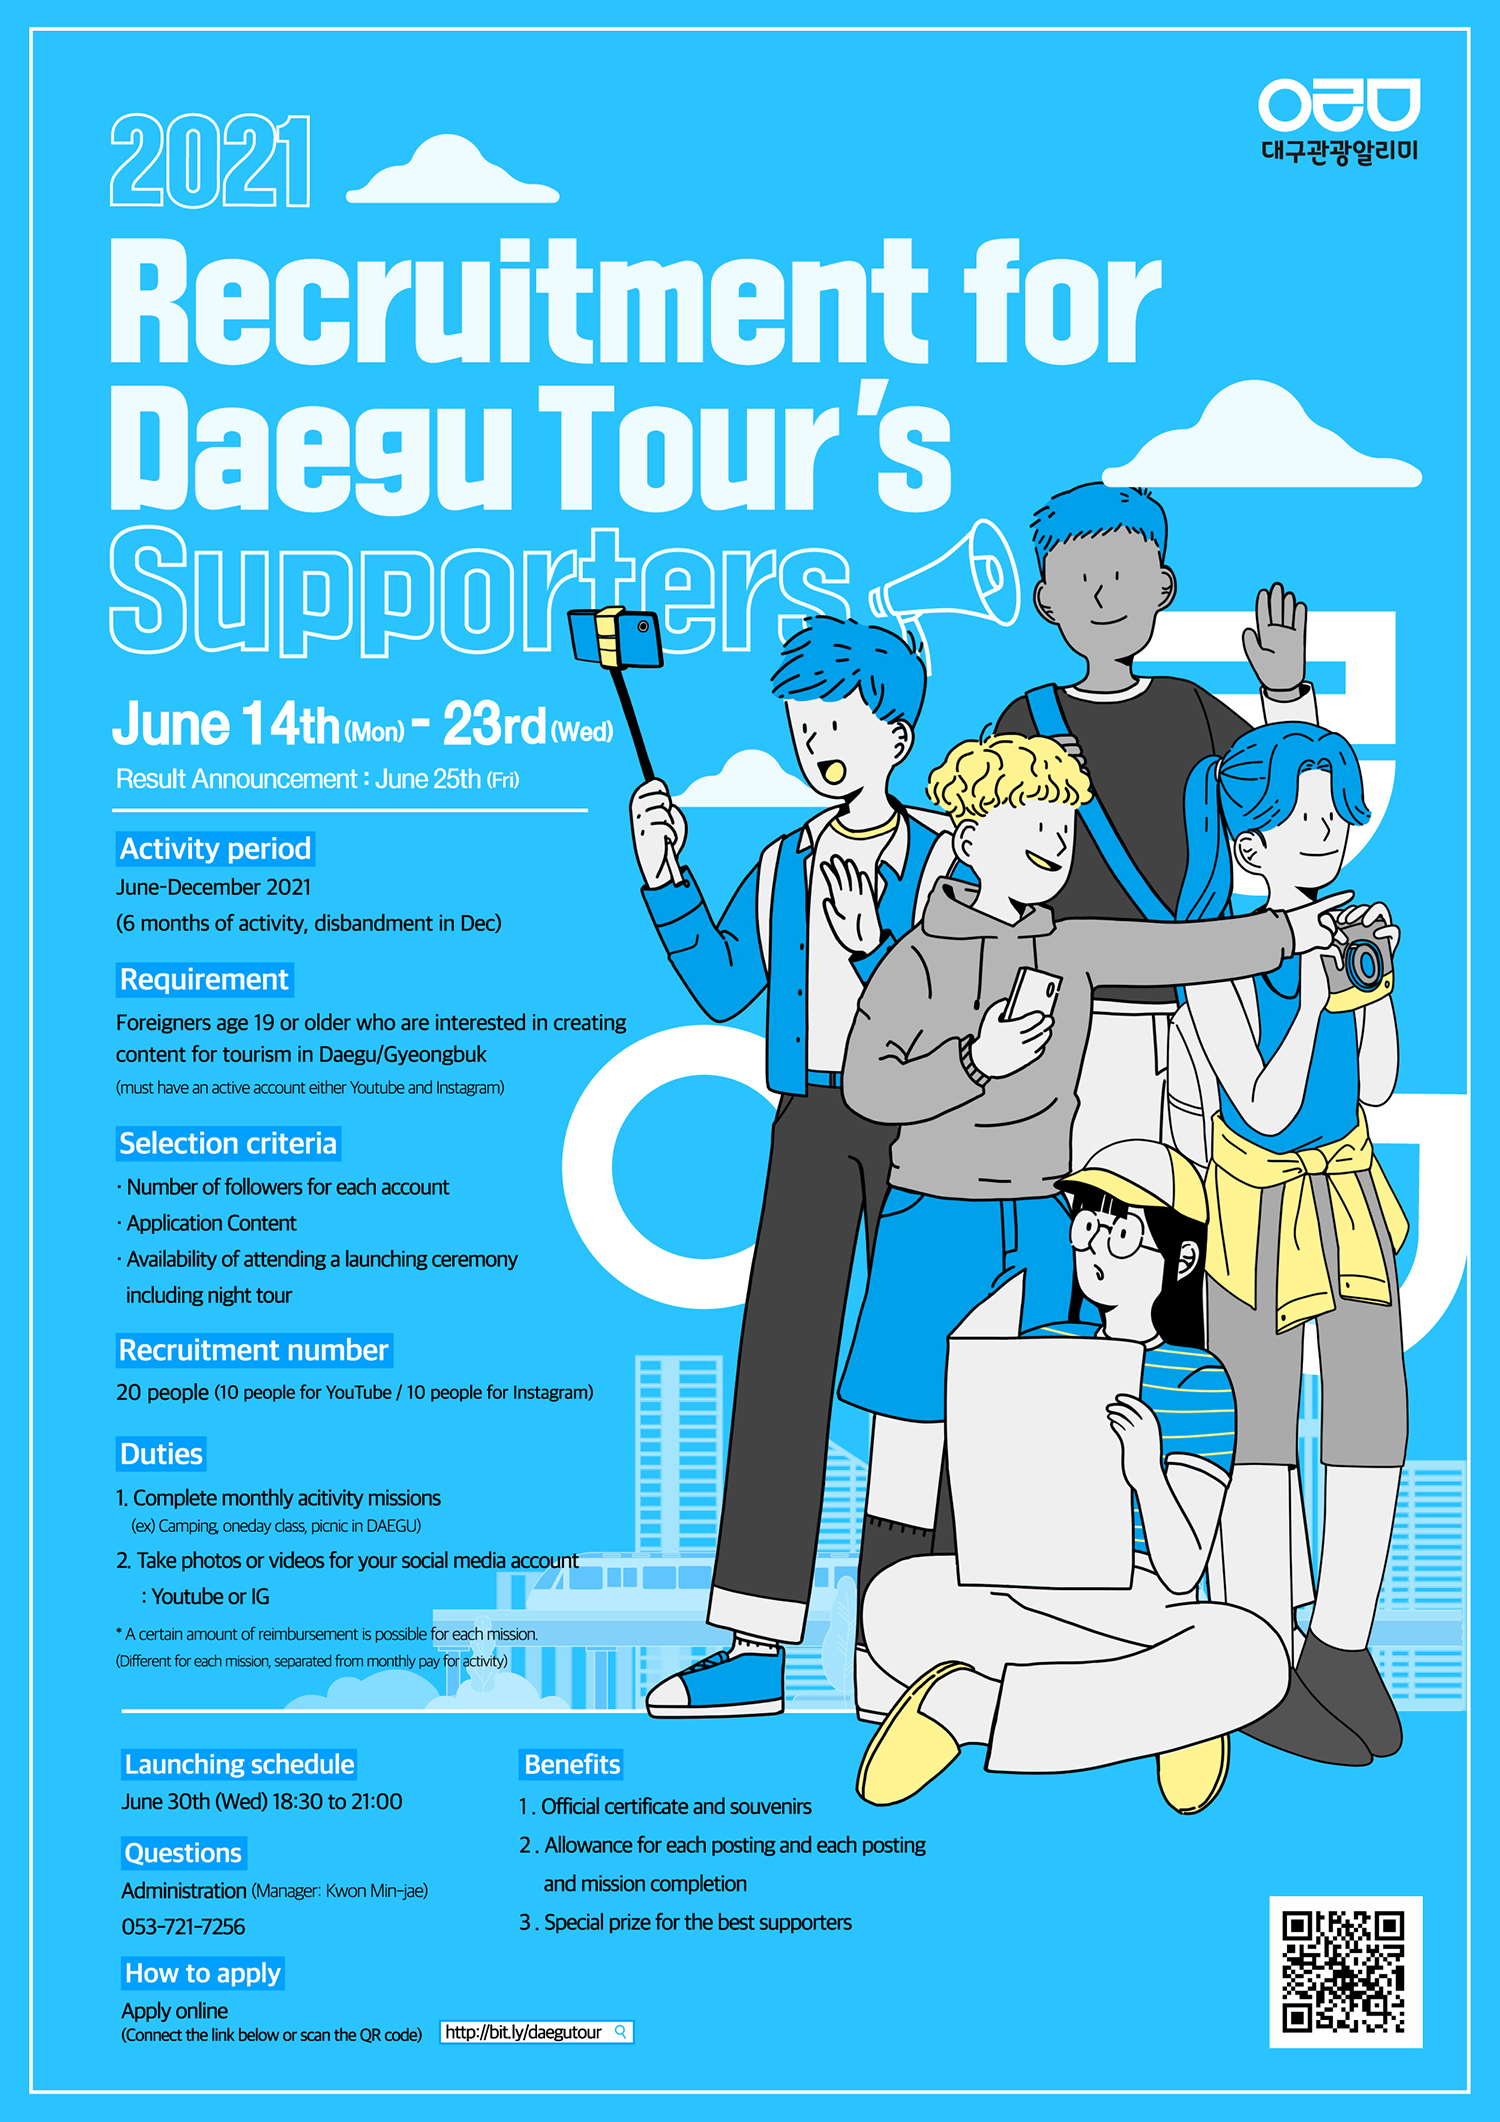 Recruitment for
Daegu Tour's
Supporers
June 14th (mon) - 23rd (wed)
Result Announcement: June 25th (Fri)
Activity period
June-December 2021
(6 months of activity, disbandment in Dec)
Requirement
Foreigners age 19 or older who are interested in creating
content for tourism in Daegu/Gyeongbuk
(must have an active account either Youtube and instagram)
Selection criteria
Number of followers for each account
Application Content
- Availability of attending a launching ceremony
including night tour
Recruitment number
20 people (10 people for YouTube / 10 people for Instagram)
Duties
1. Complete monthly acitivity missions
(ex) Camping oneday class picnic in DAEGU)
2. Take photos or videos for your social media account
: Youtube or IG
A certain amount of reimbursement is possible for each mission
(Different for each mission, separated from monthly pay for
activity)
Launching schedule
June 30th (Wed) 18:30 to 21:00
Questions
Administration (Manager: Kwon Min-jae)
053-721-7256
Benefits
1. Official certificate and souvenirs
2. Allowance for each posting and each posting
and mission completion
3. Special prize for the best supporters
How to apply
Apply online
(Connect the link below or scan the QR code)
http://bit.ly/daegutour